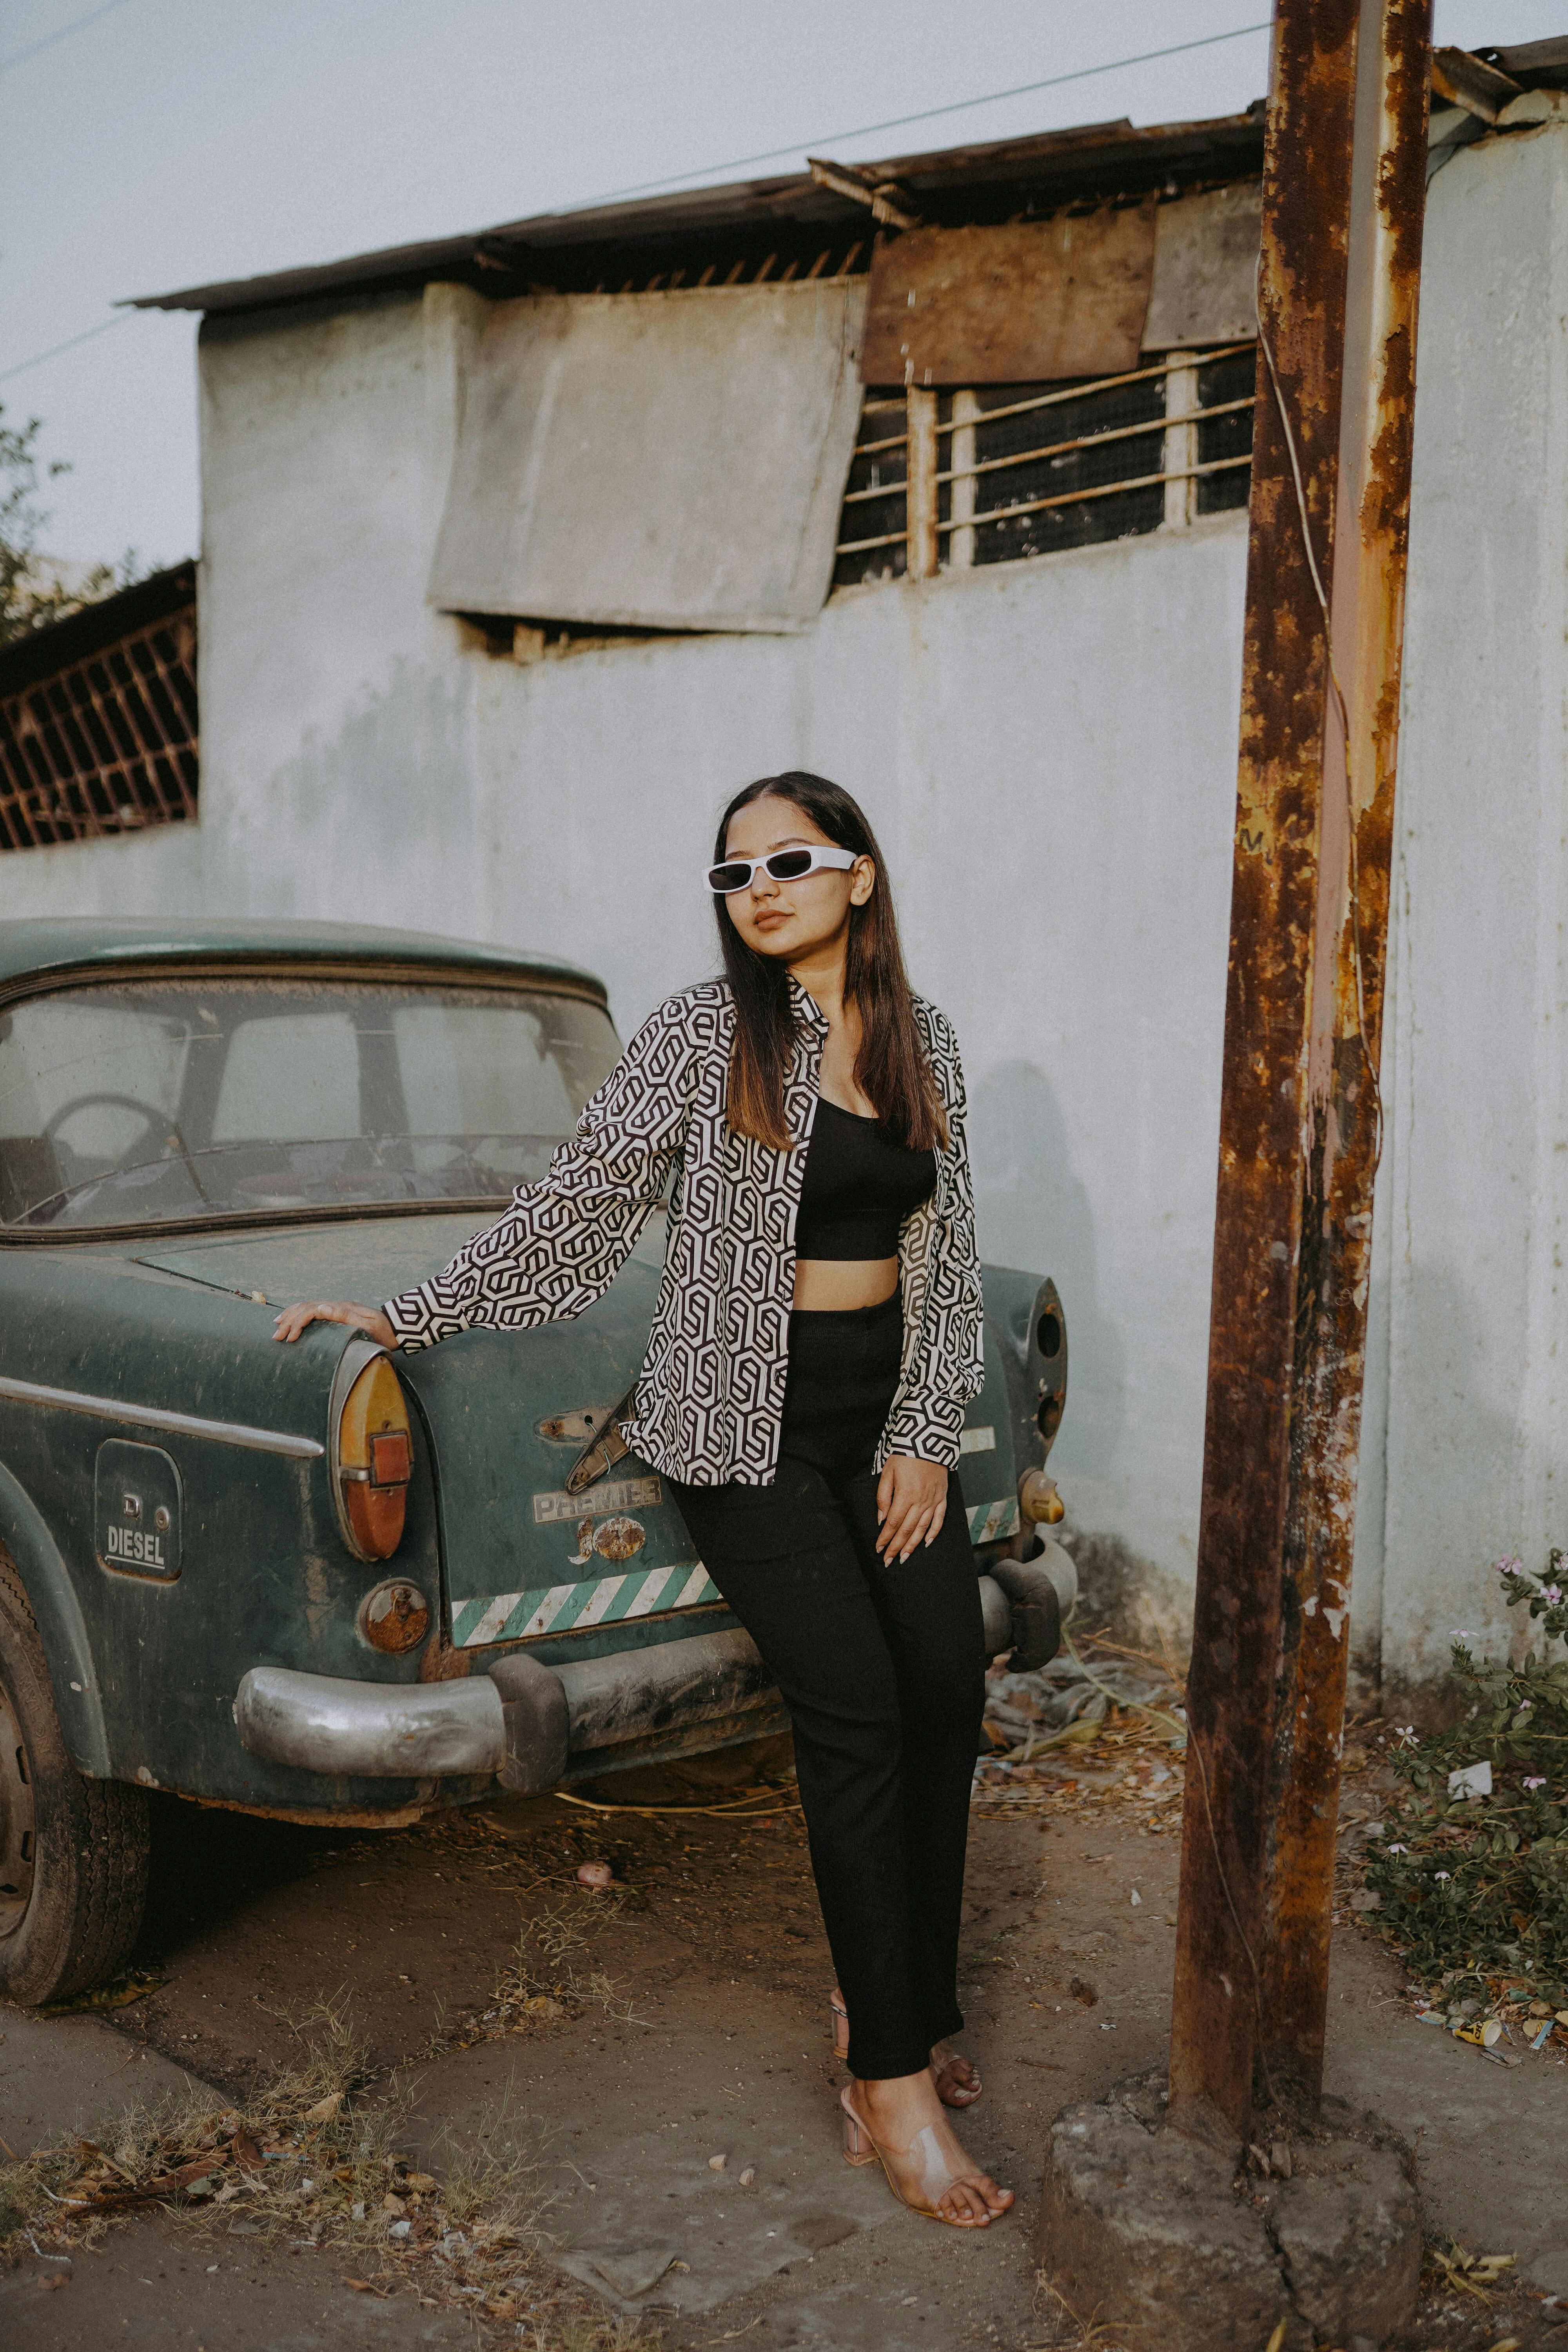 Easy and simple car poses to try | Gallery posted by Mirna Salazar | Lemon8